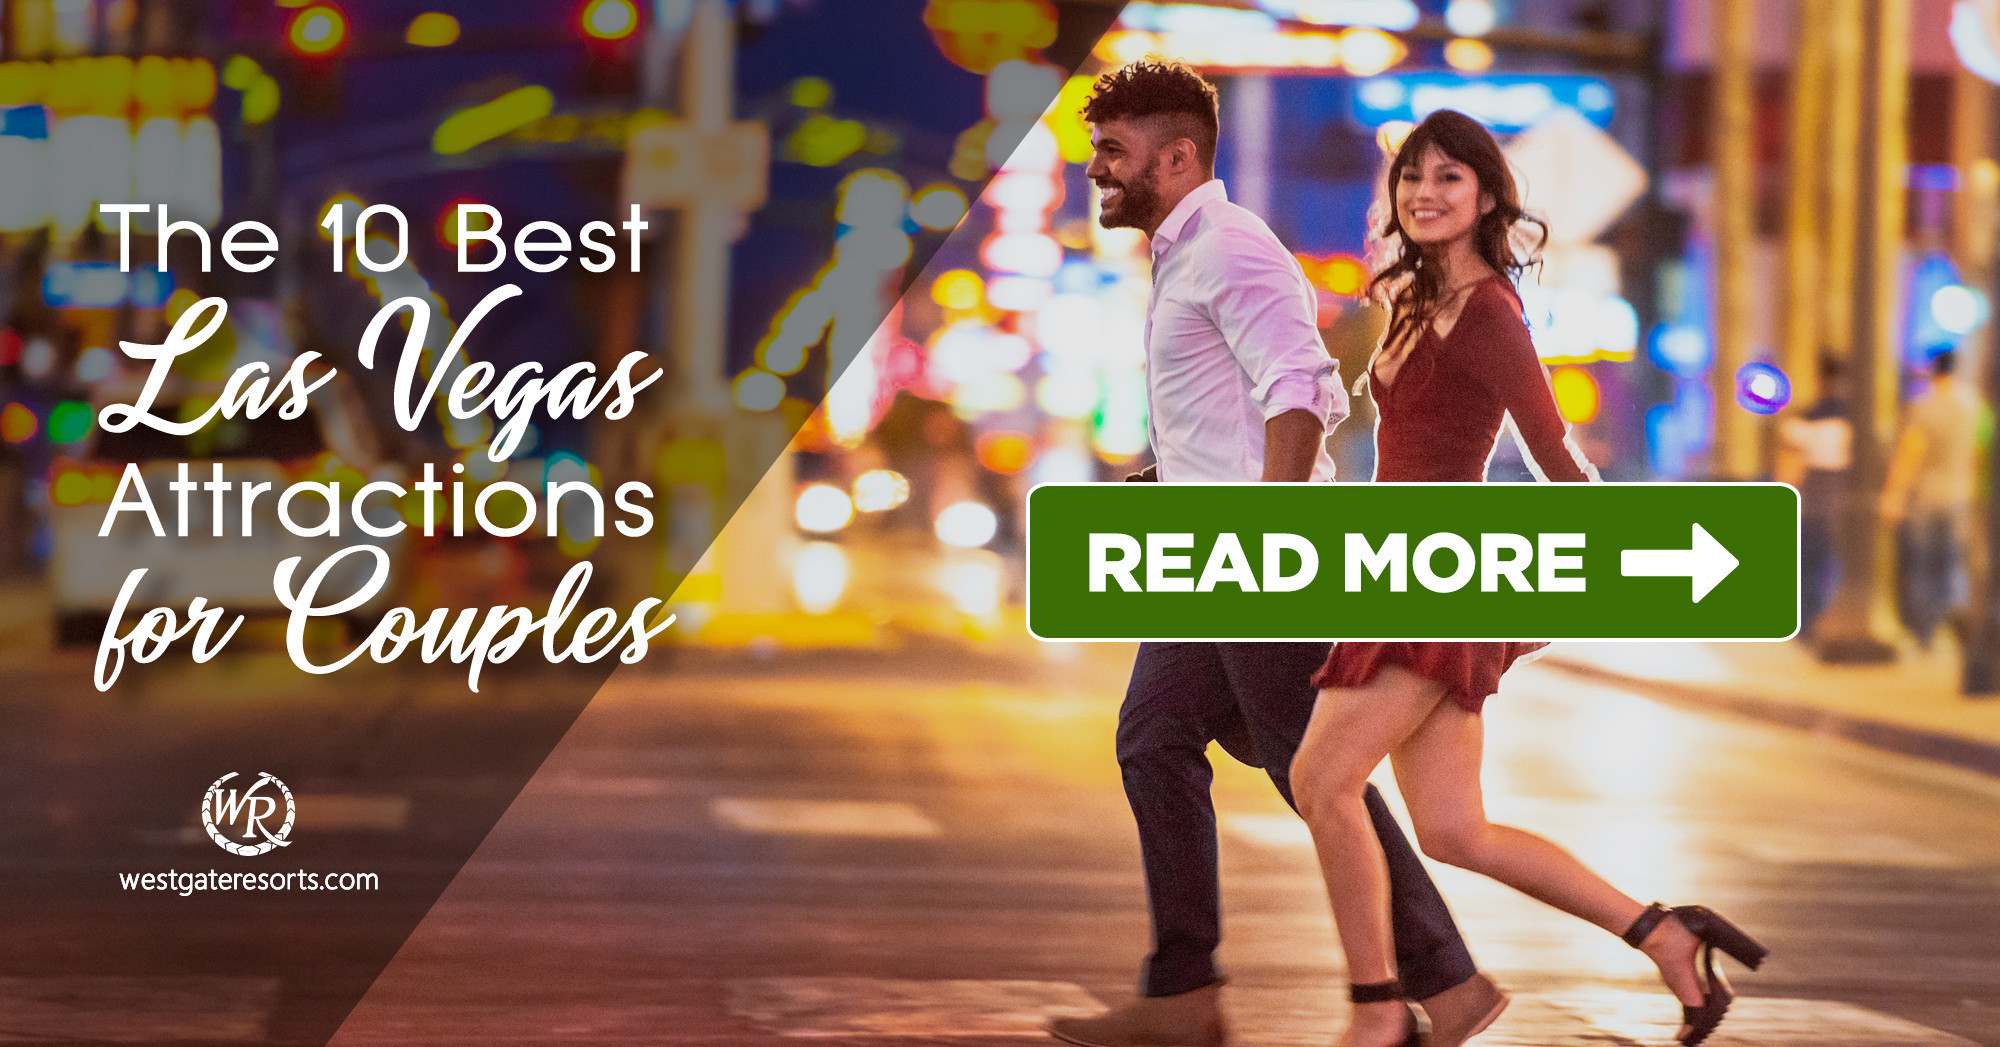 The 10 Best Las Vegas Attractions for Couples | Things to do in Las Vegas for couples